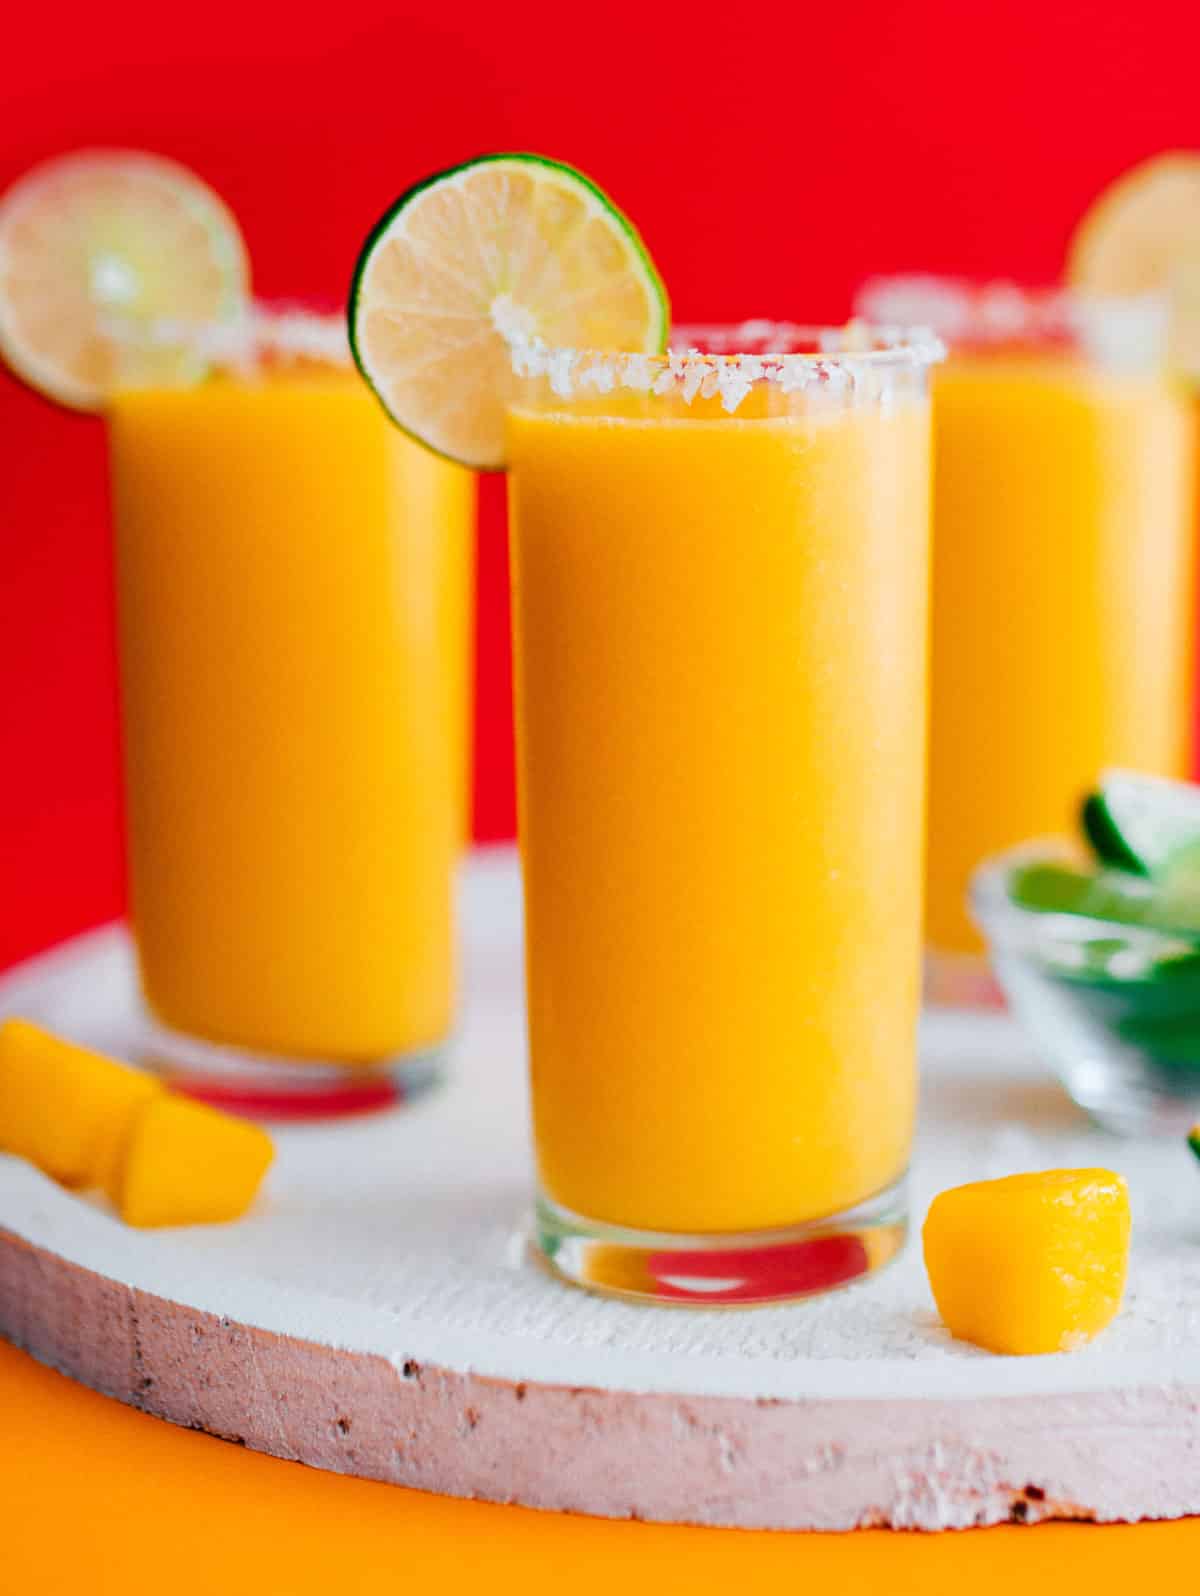 Frozen mango margarita slush in a glass with a slice of lime on a red background.